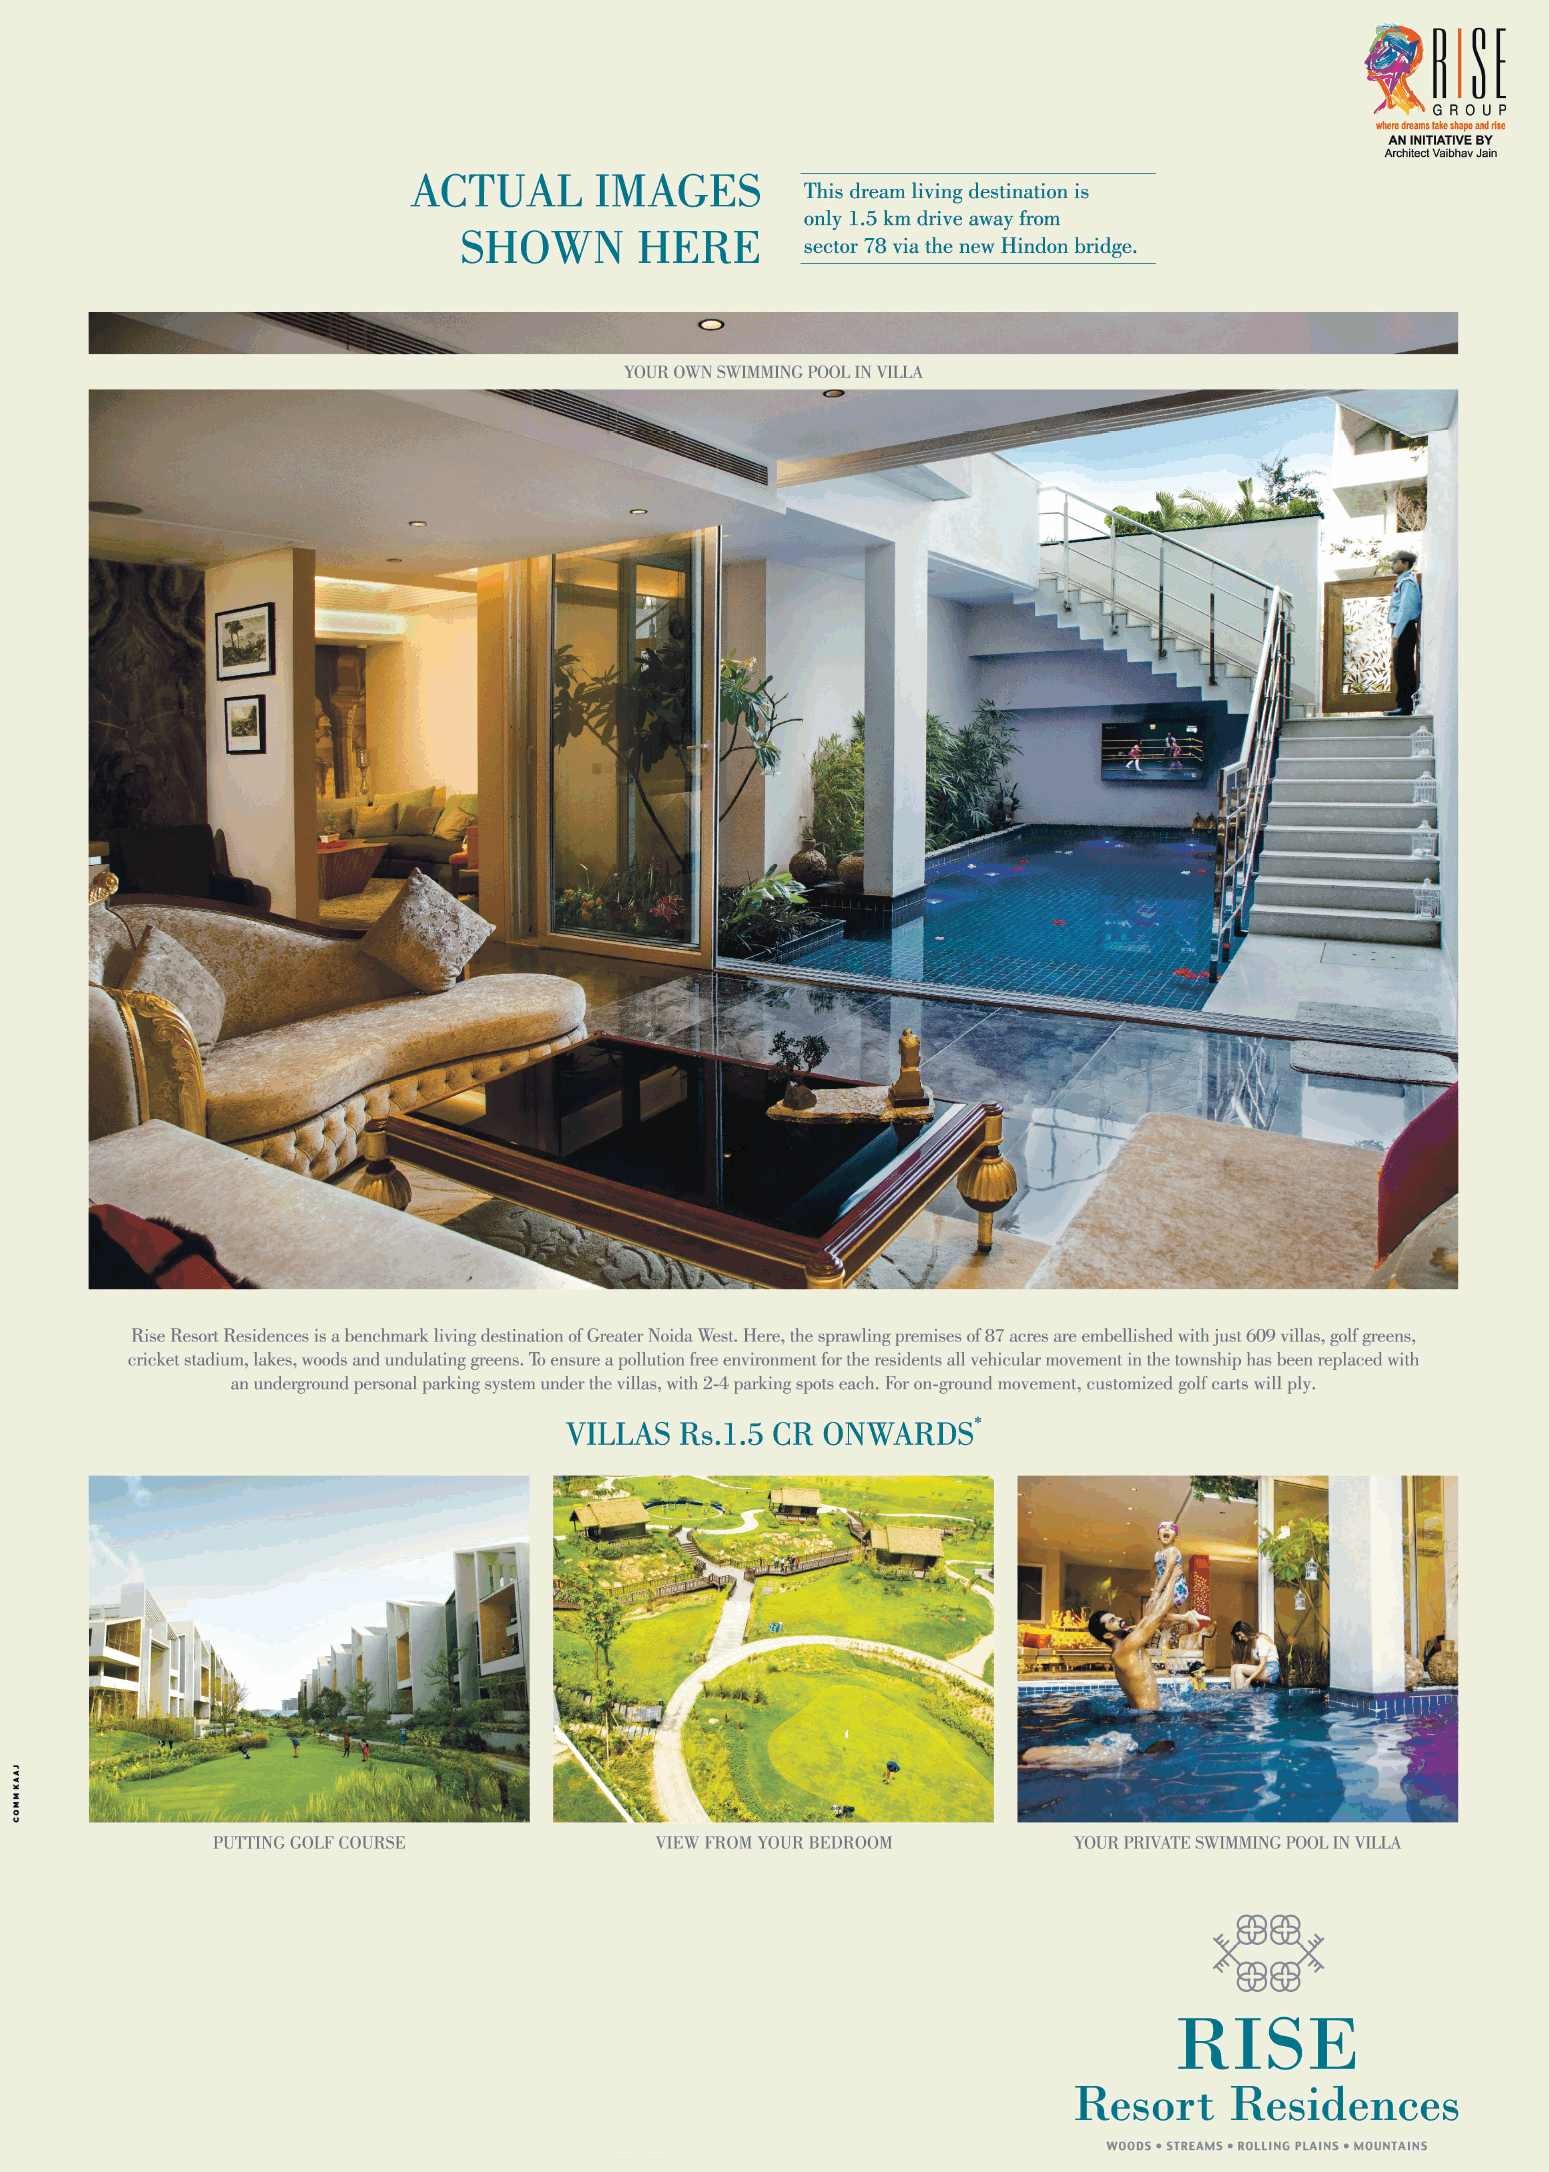 Introducing luxury villas at Rs. 1.5 Cr. at Rise Resort Residences in Greater Noida